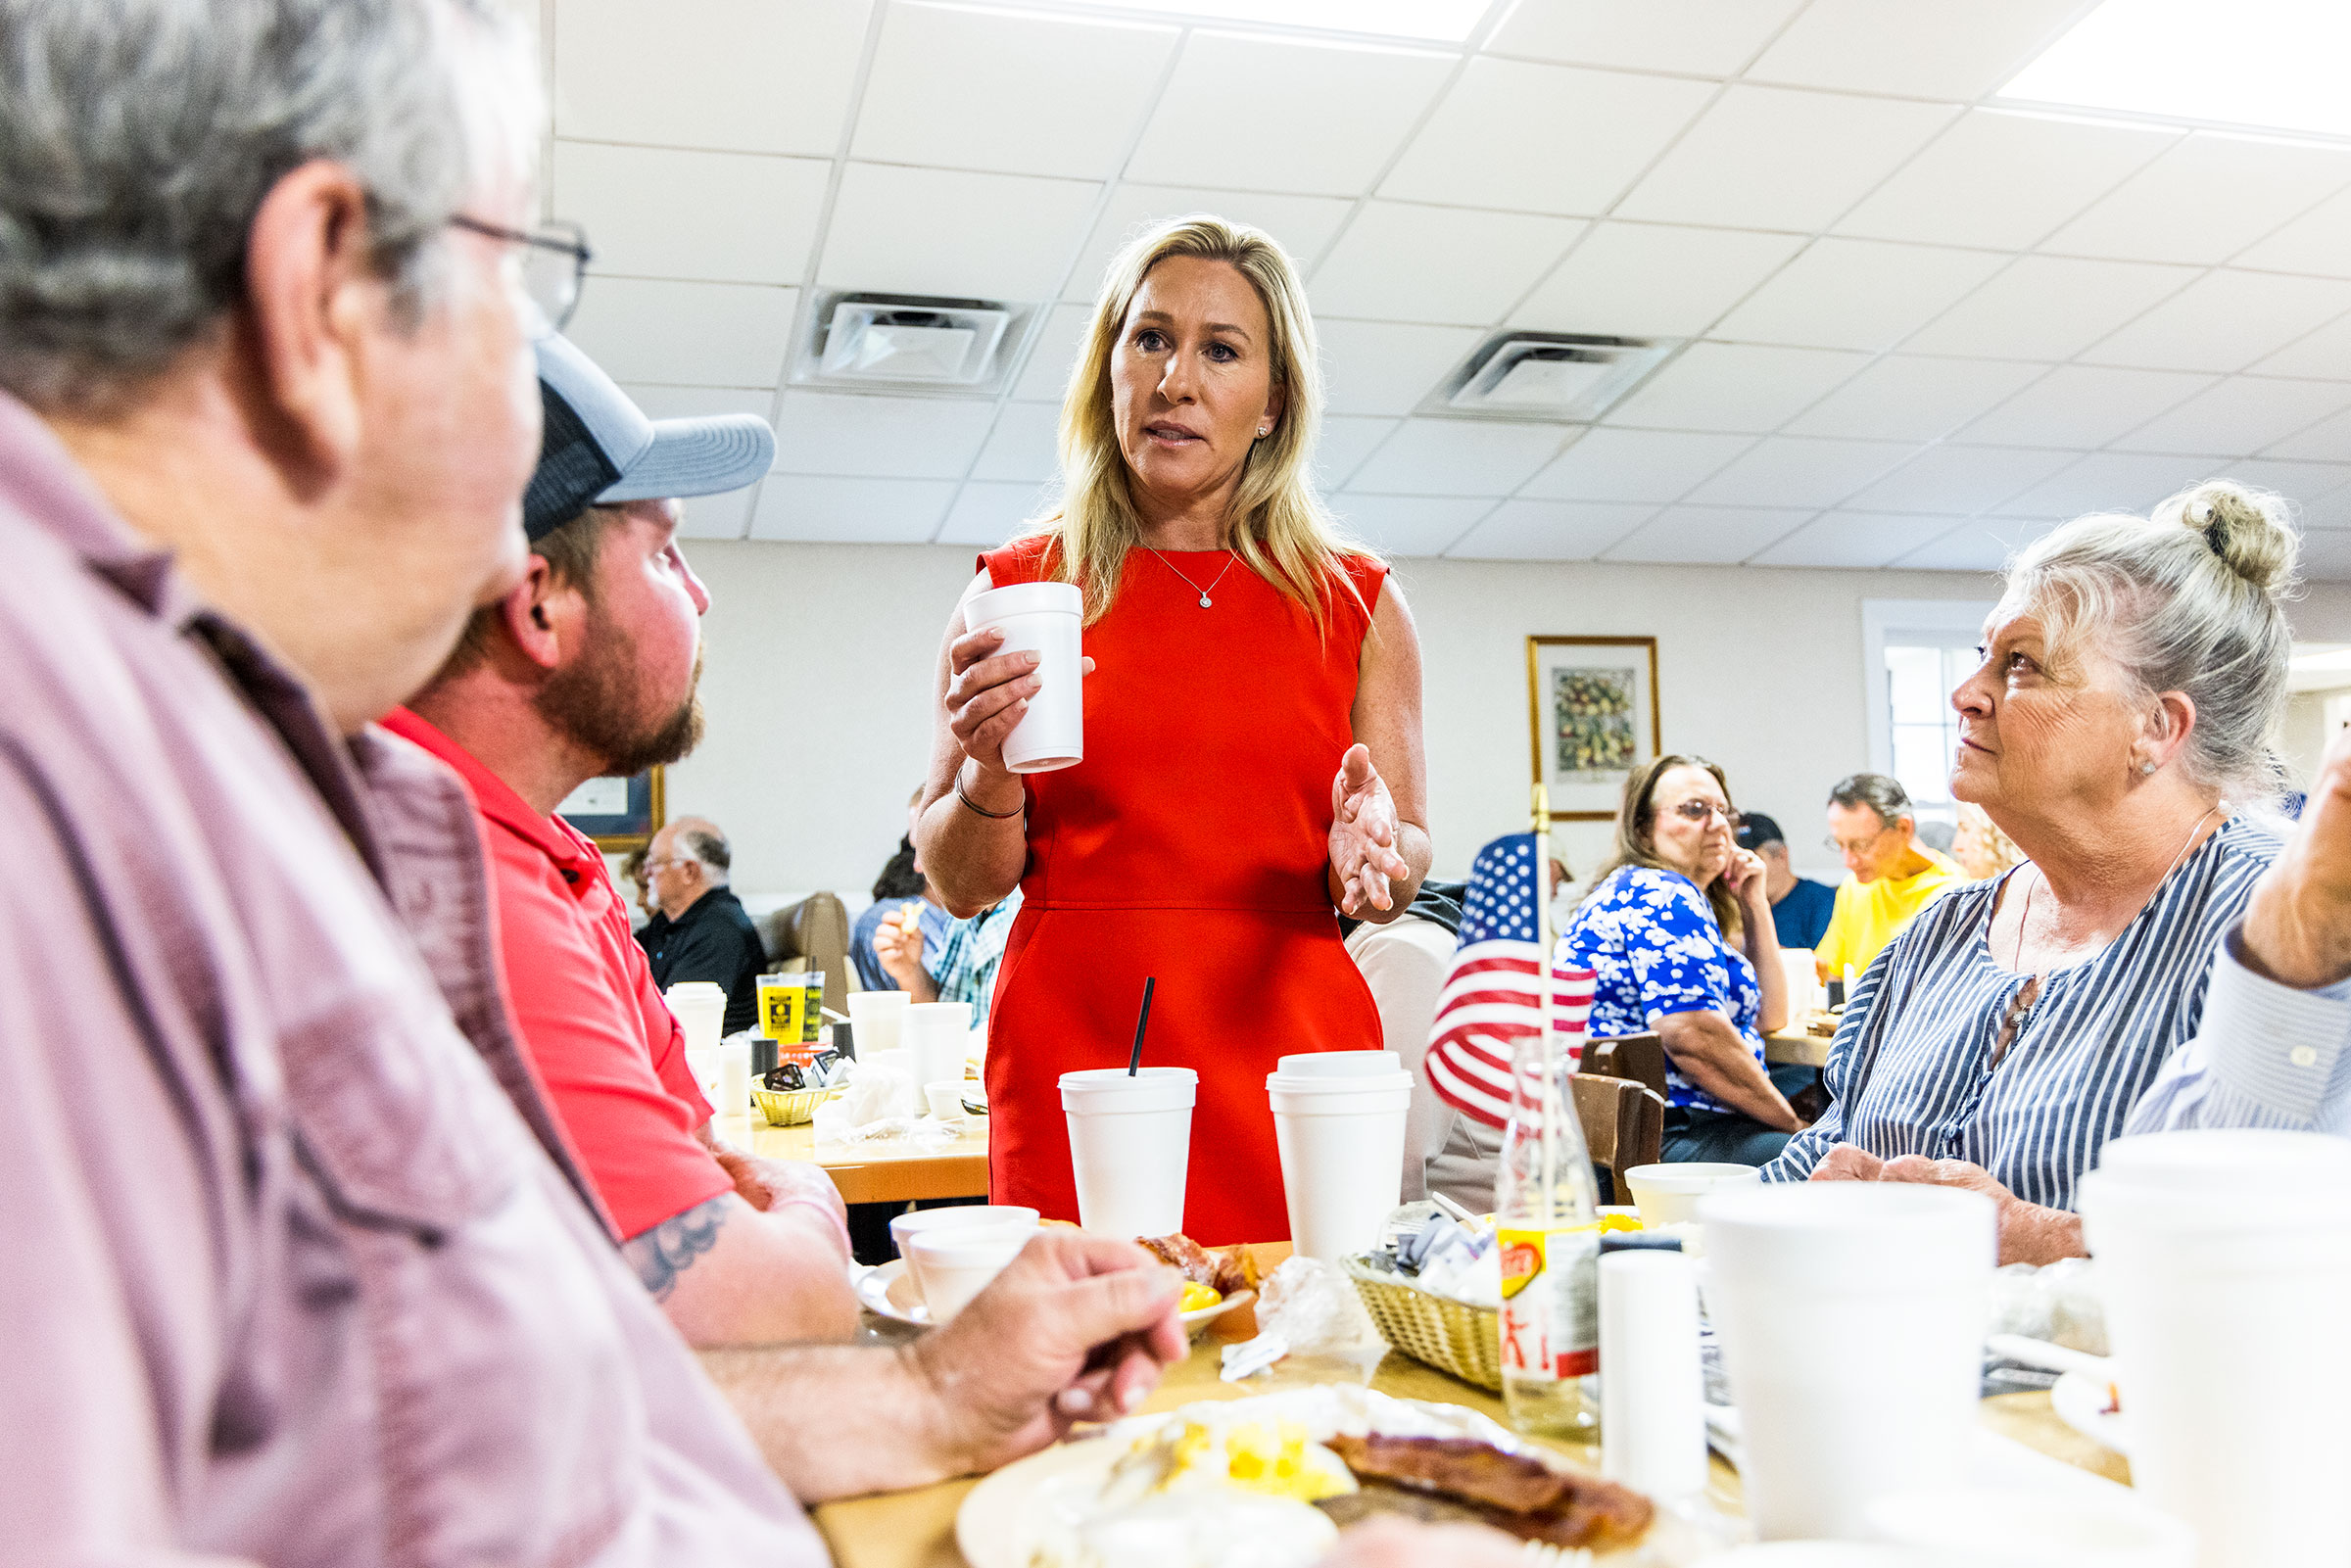 Greene speaks with supporters at Linda's Place in Rockmart, Ga. (Andrew Hetherington for TIME)